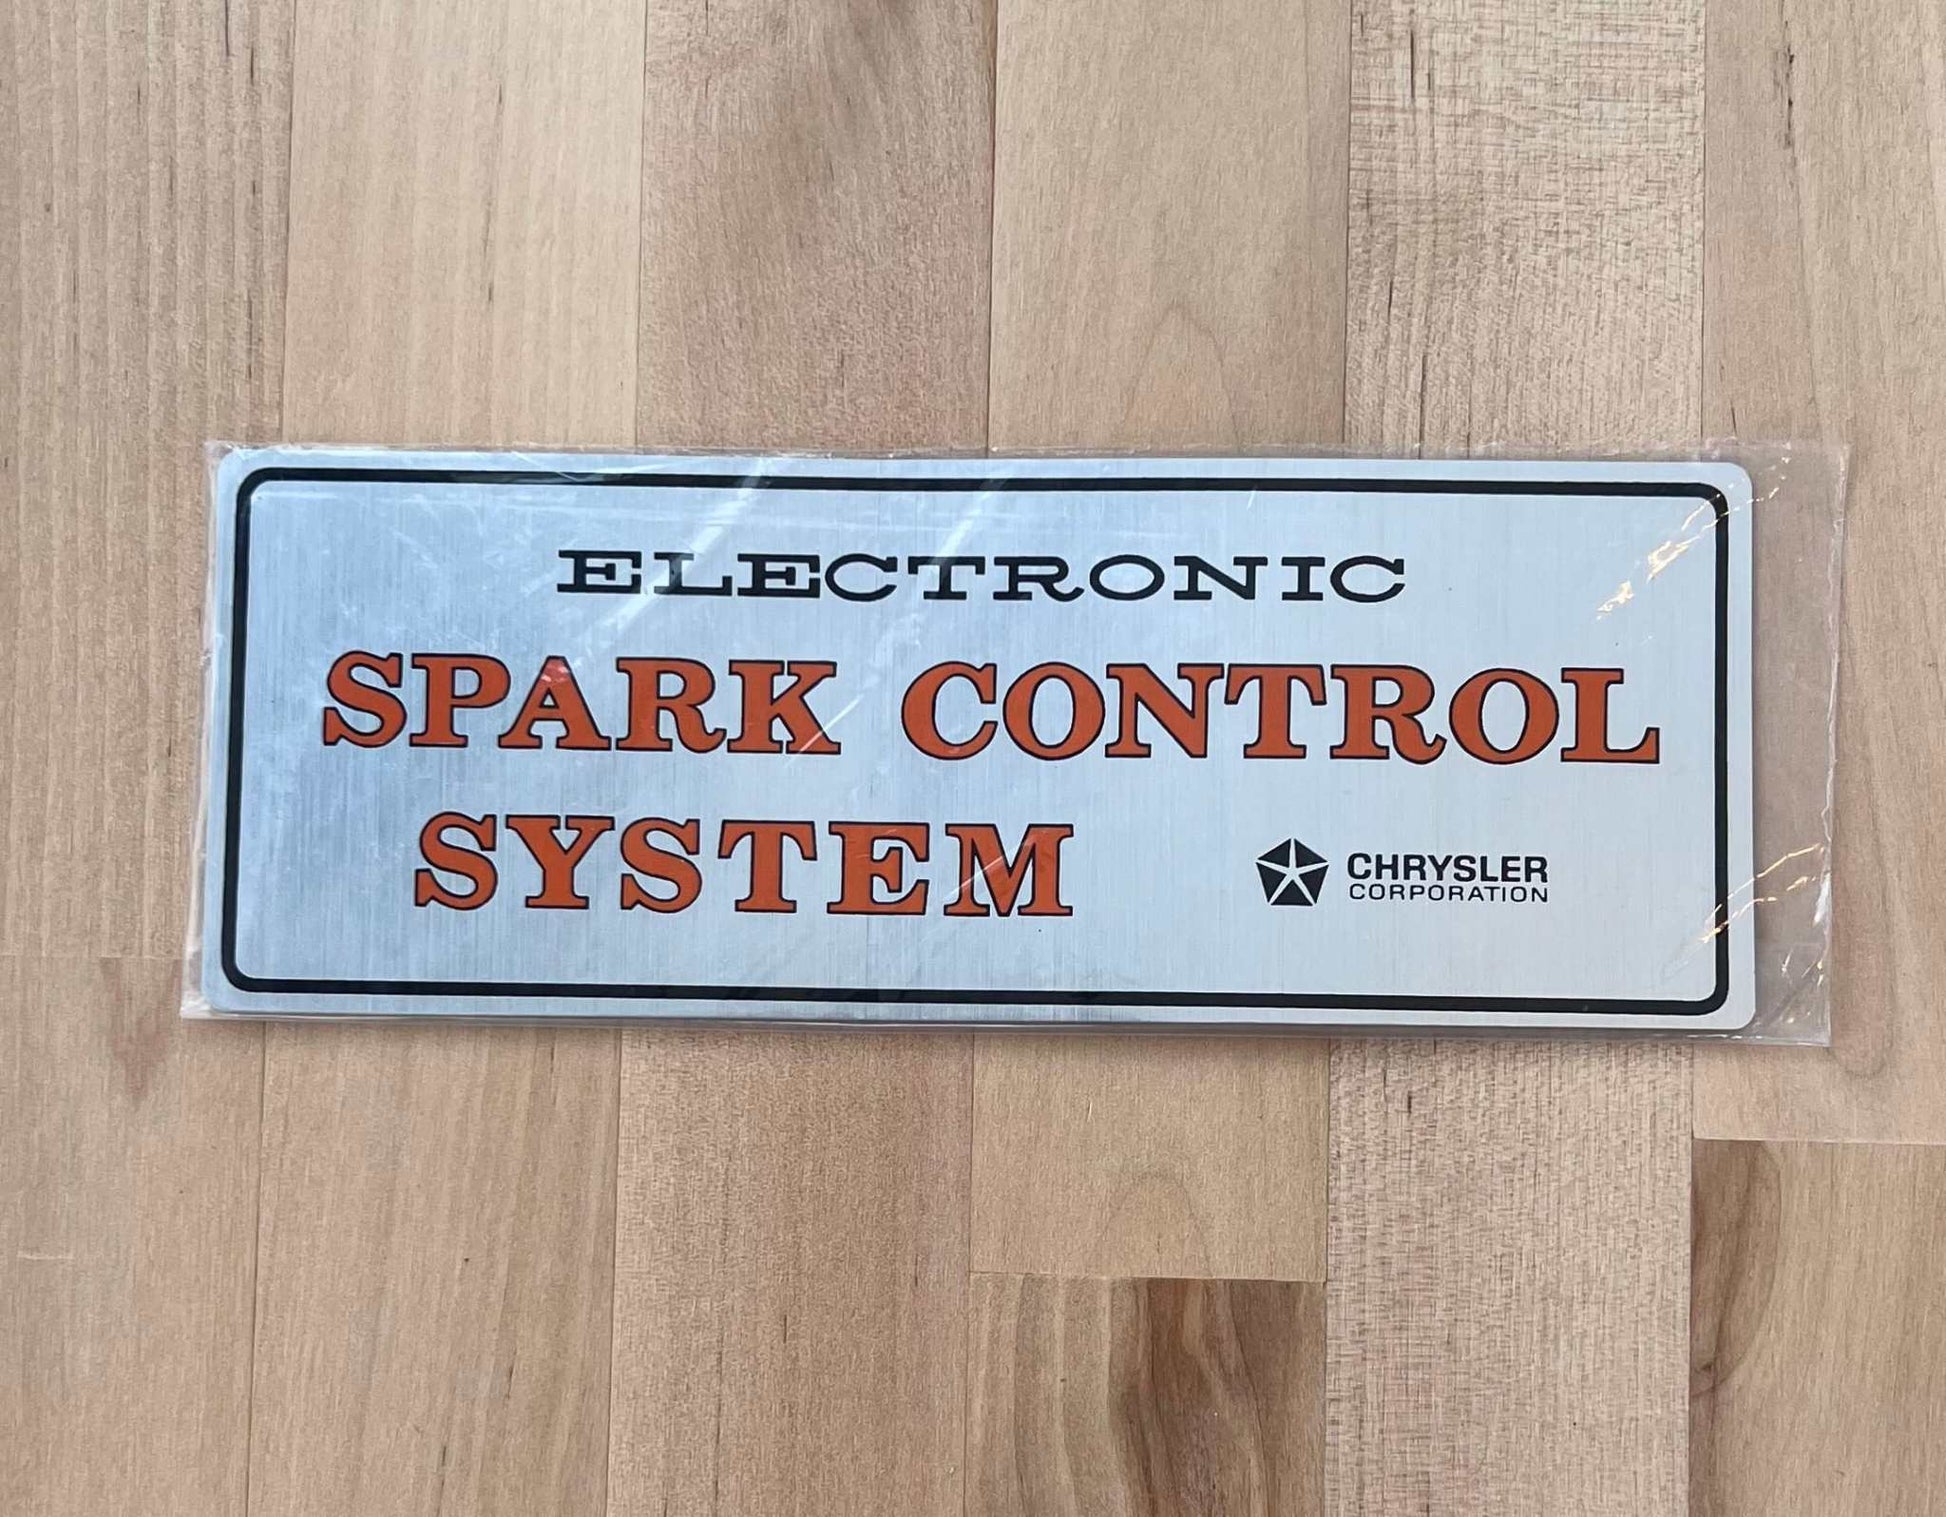 Electronic Spark Control System Chrysler Decal